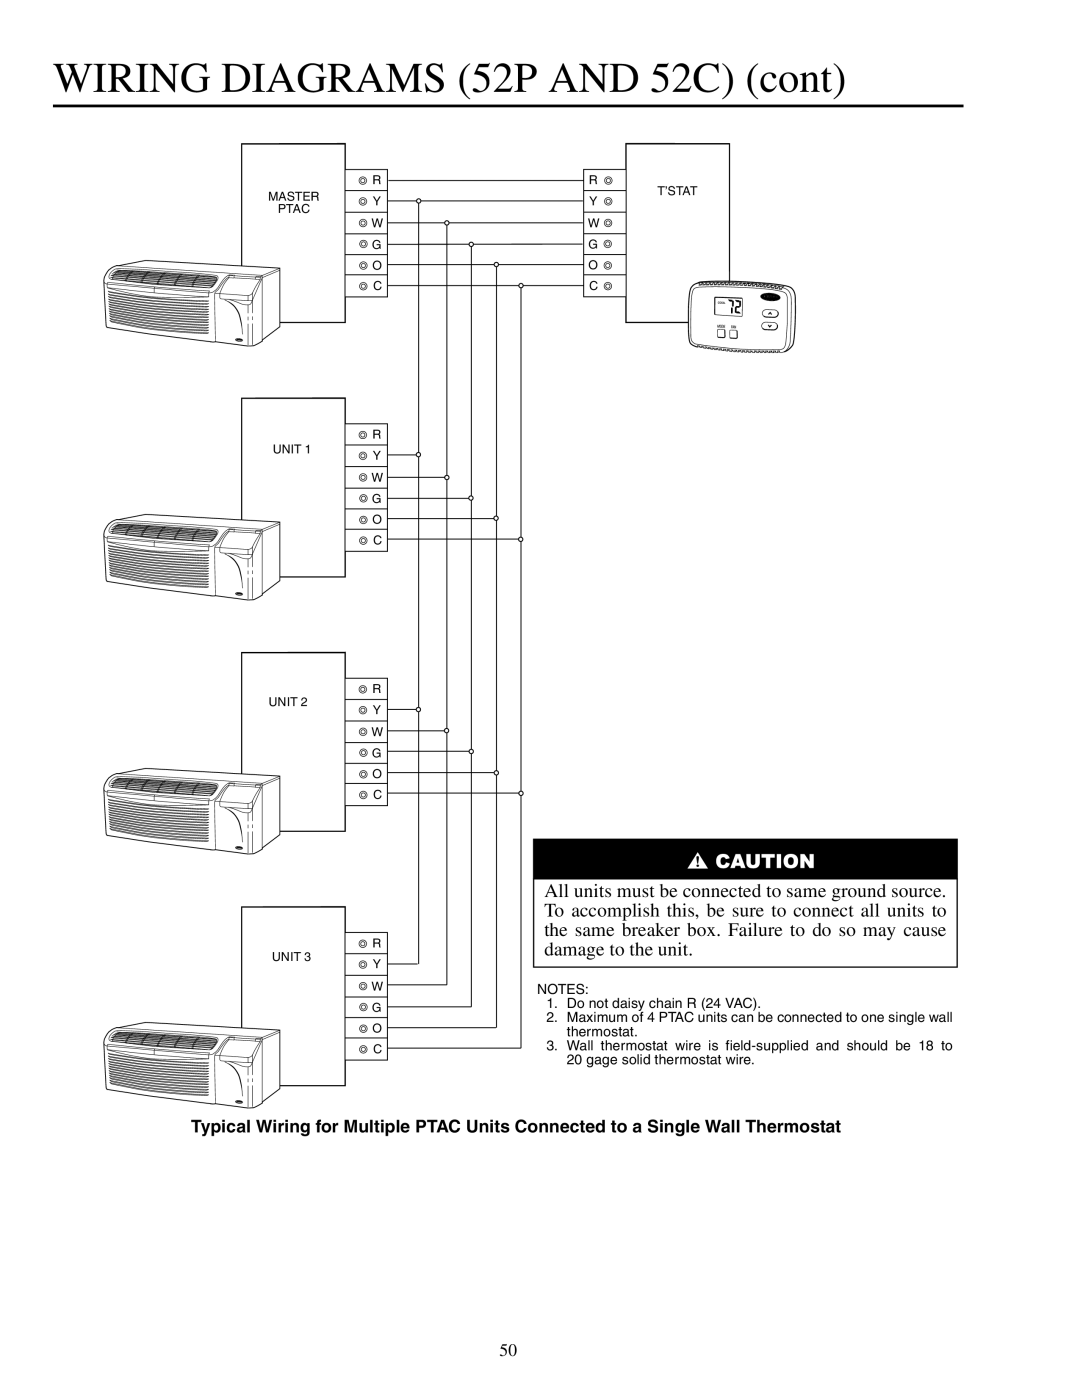 Carrier 592-085 warranty WIRING DIAGRAMS 52P AND 52C cont, NOTES 1.Do not daisy chain R 24 VAC 